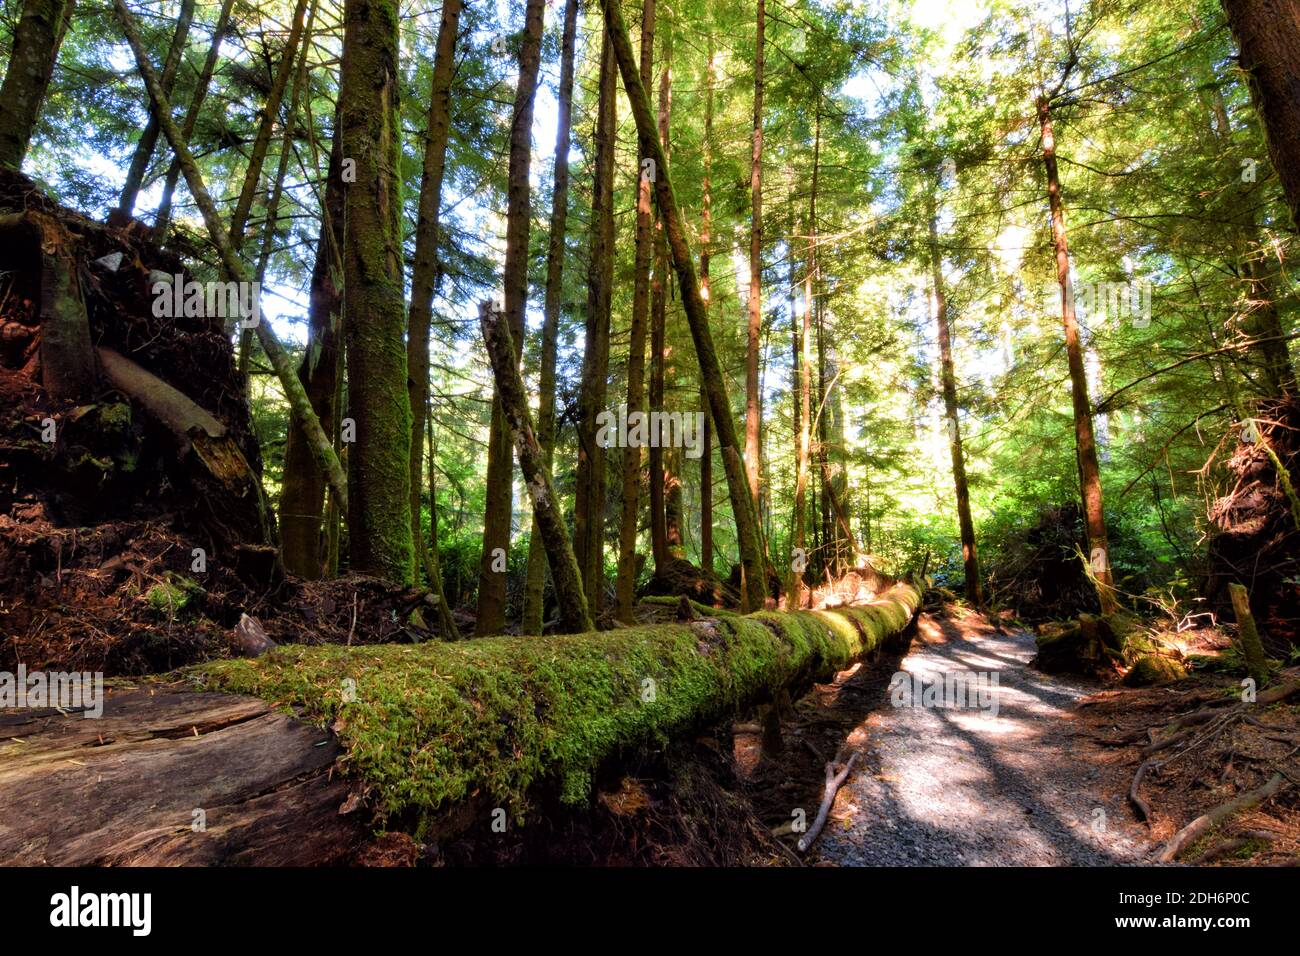 Old Growth Trees in Sandcut Beach, Vancouver, British Columbia Stock Photo